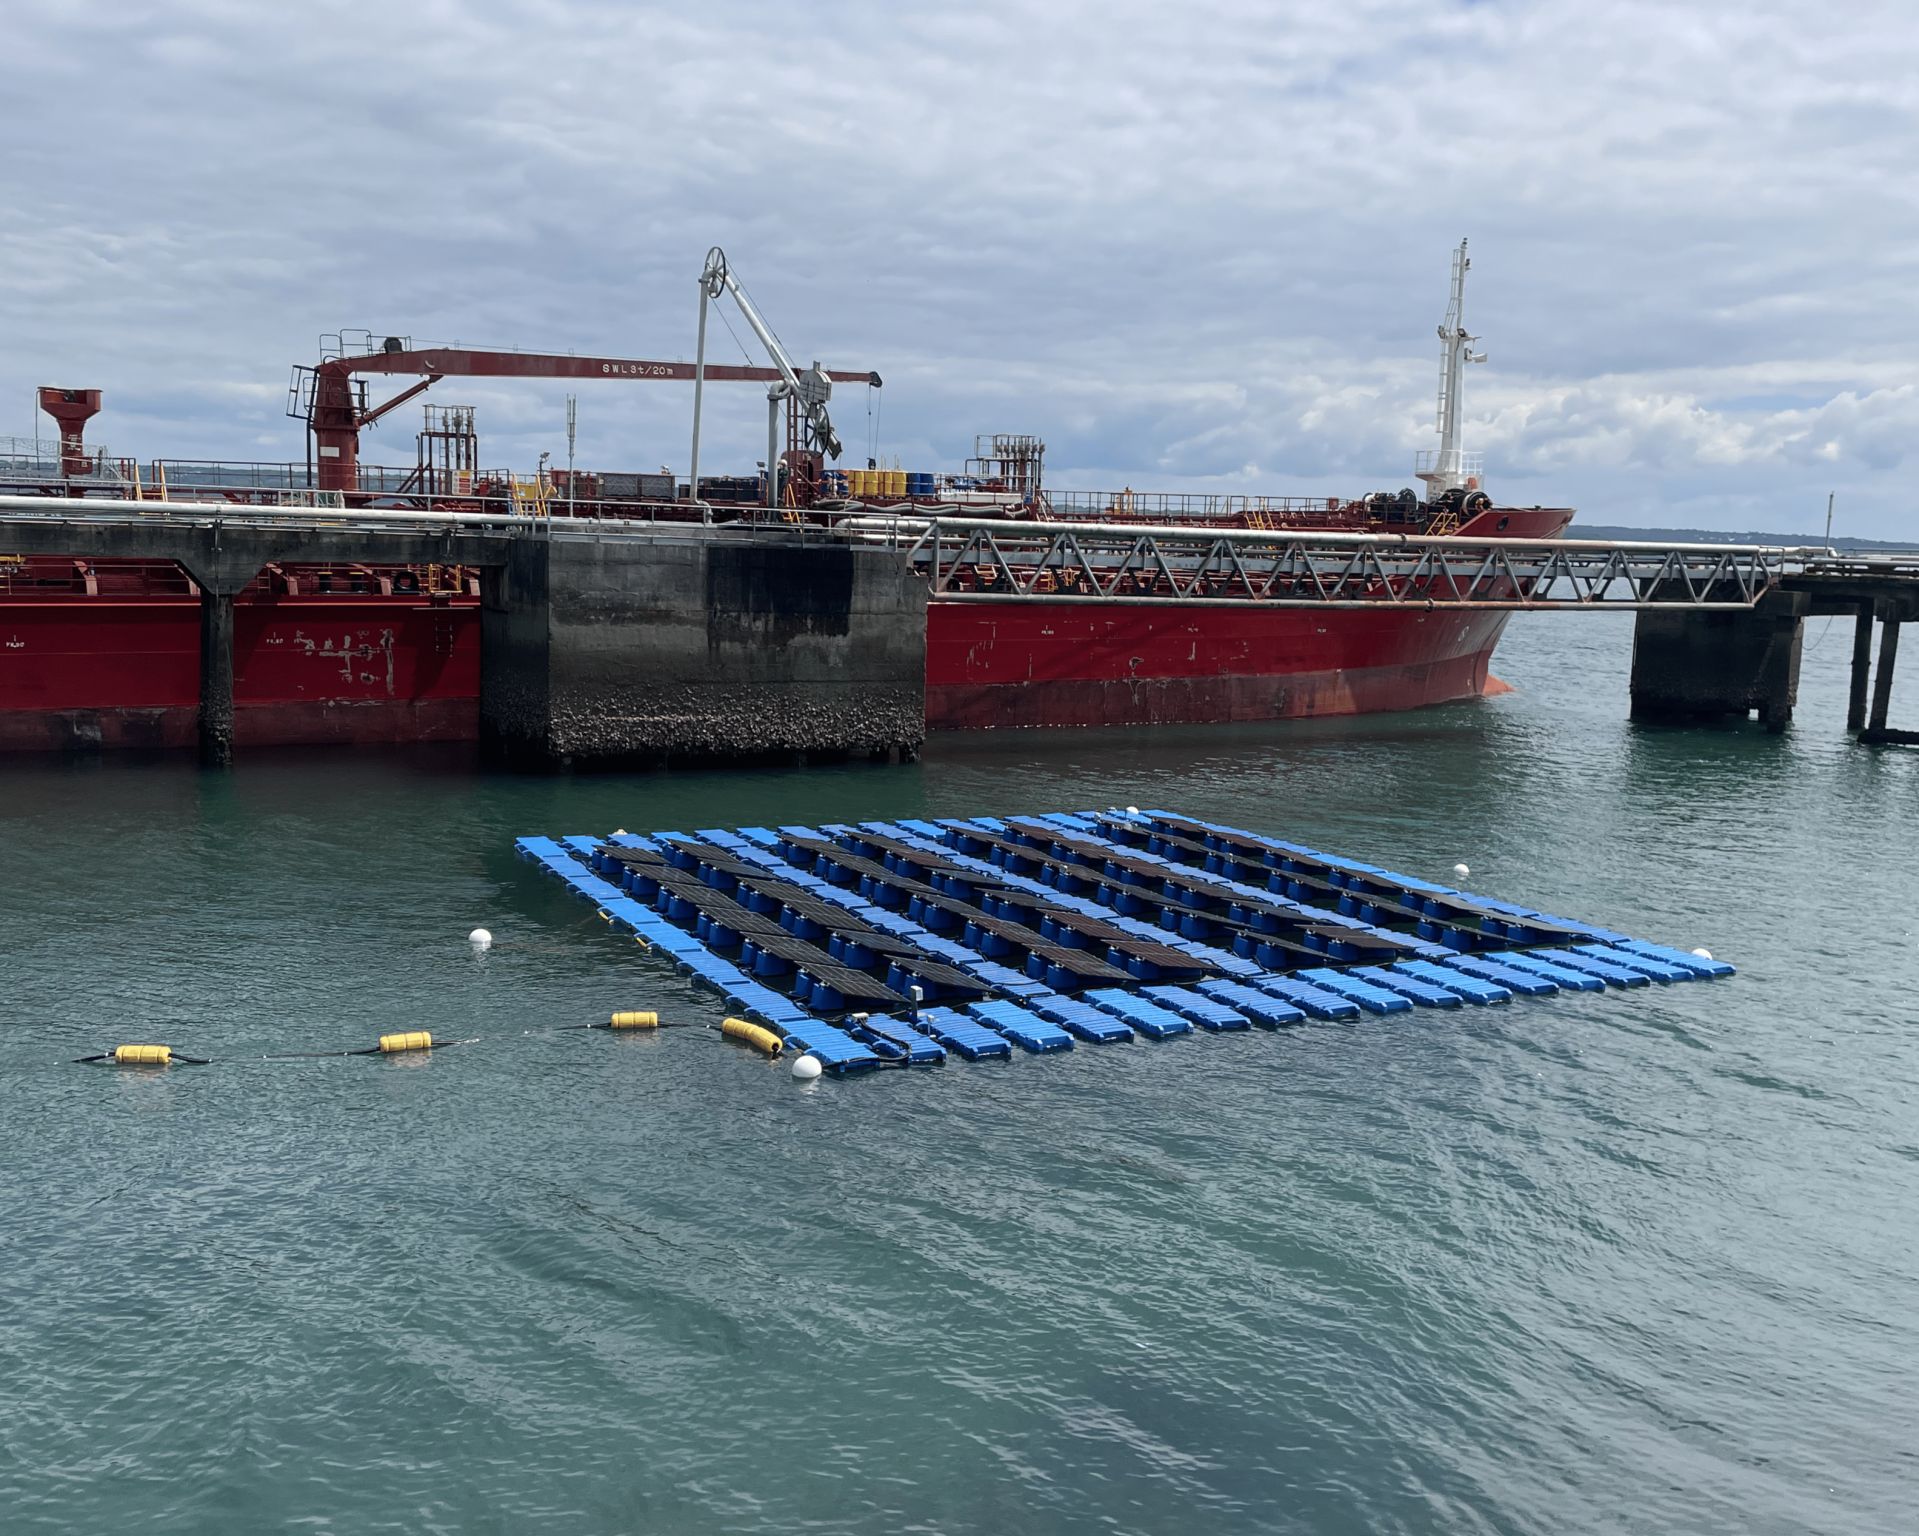 HelioRec has finished the inspection of the 25 kW floating solar power plant that is located at Brest Port, France.